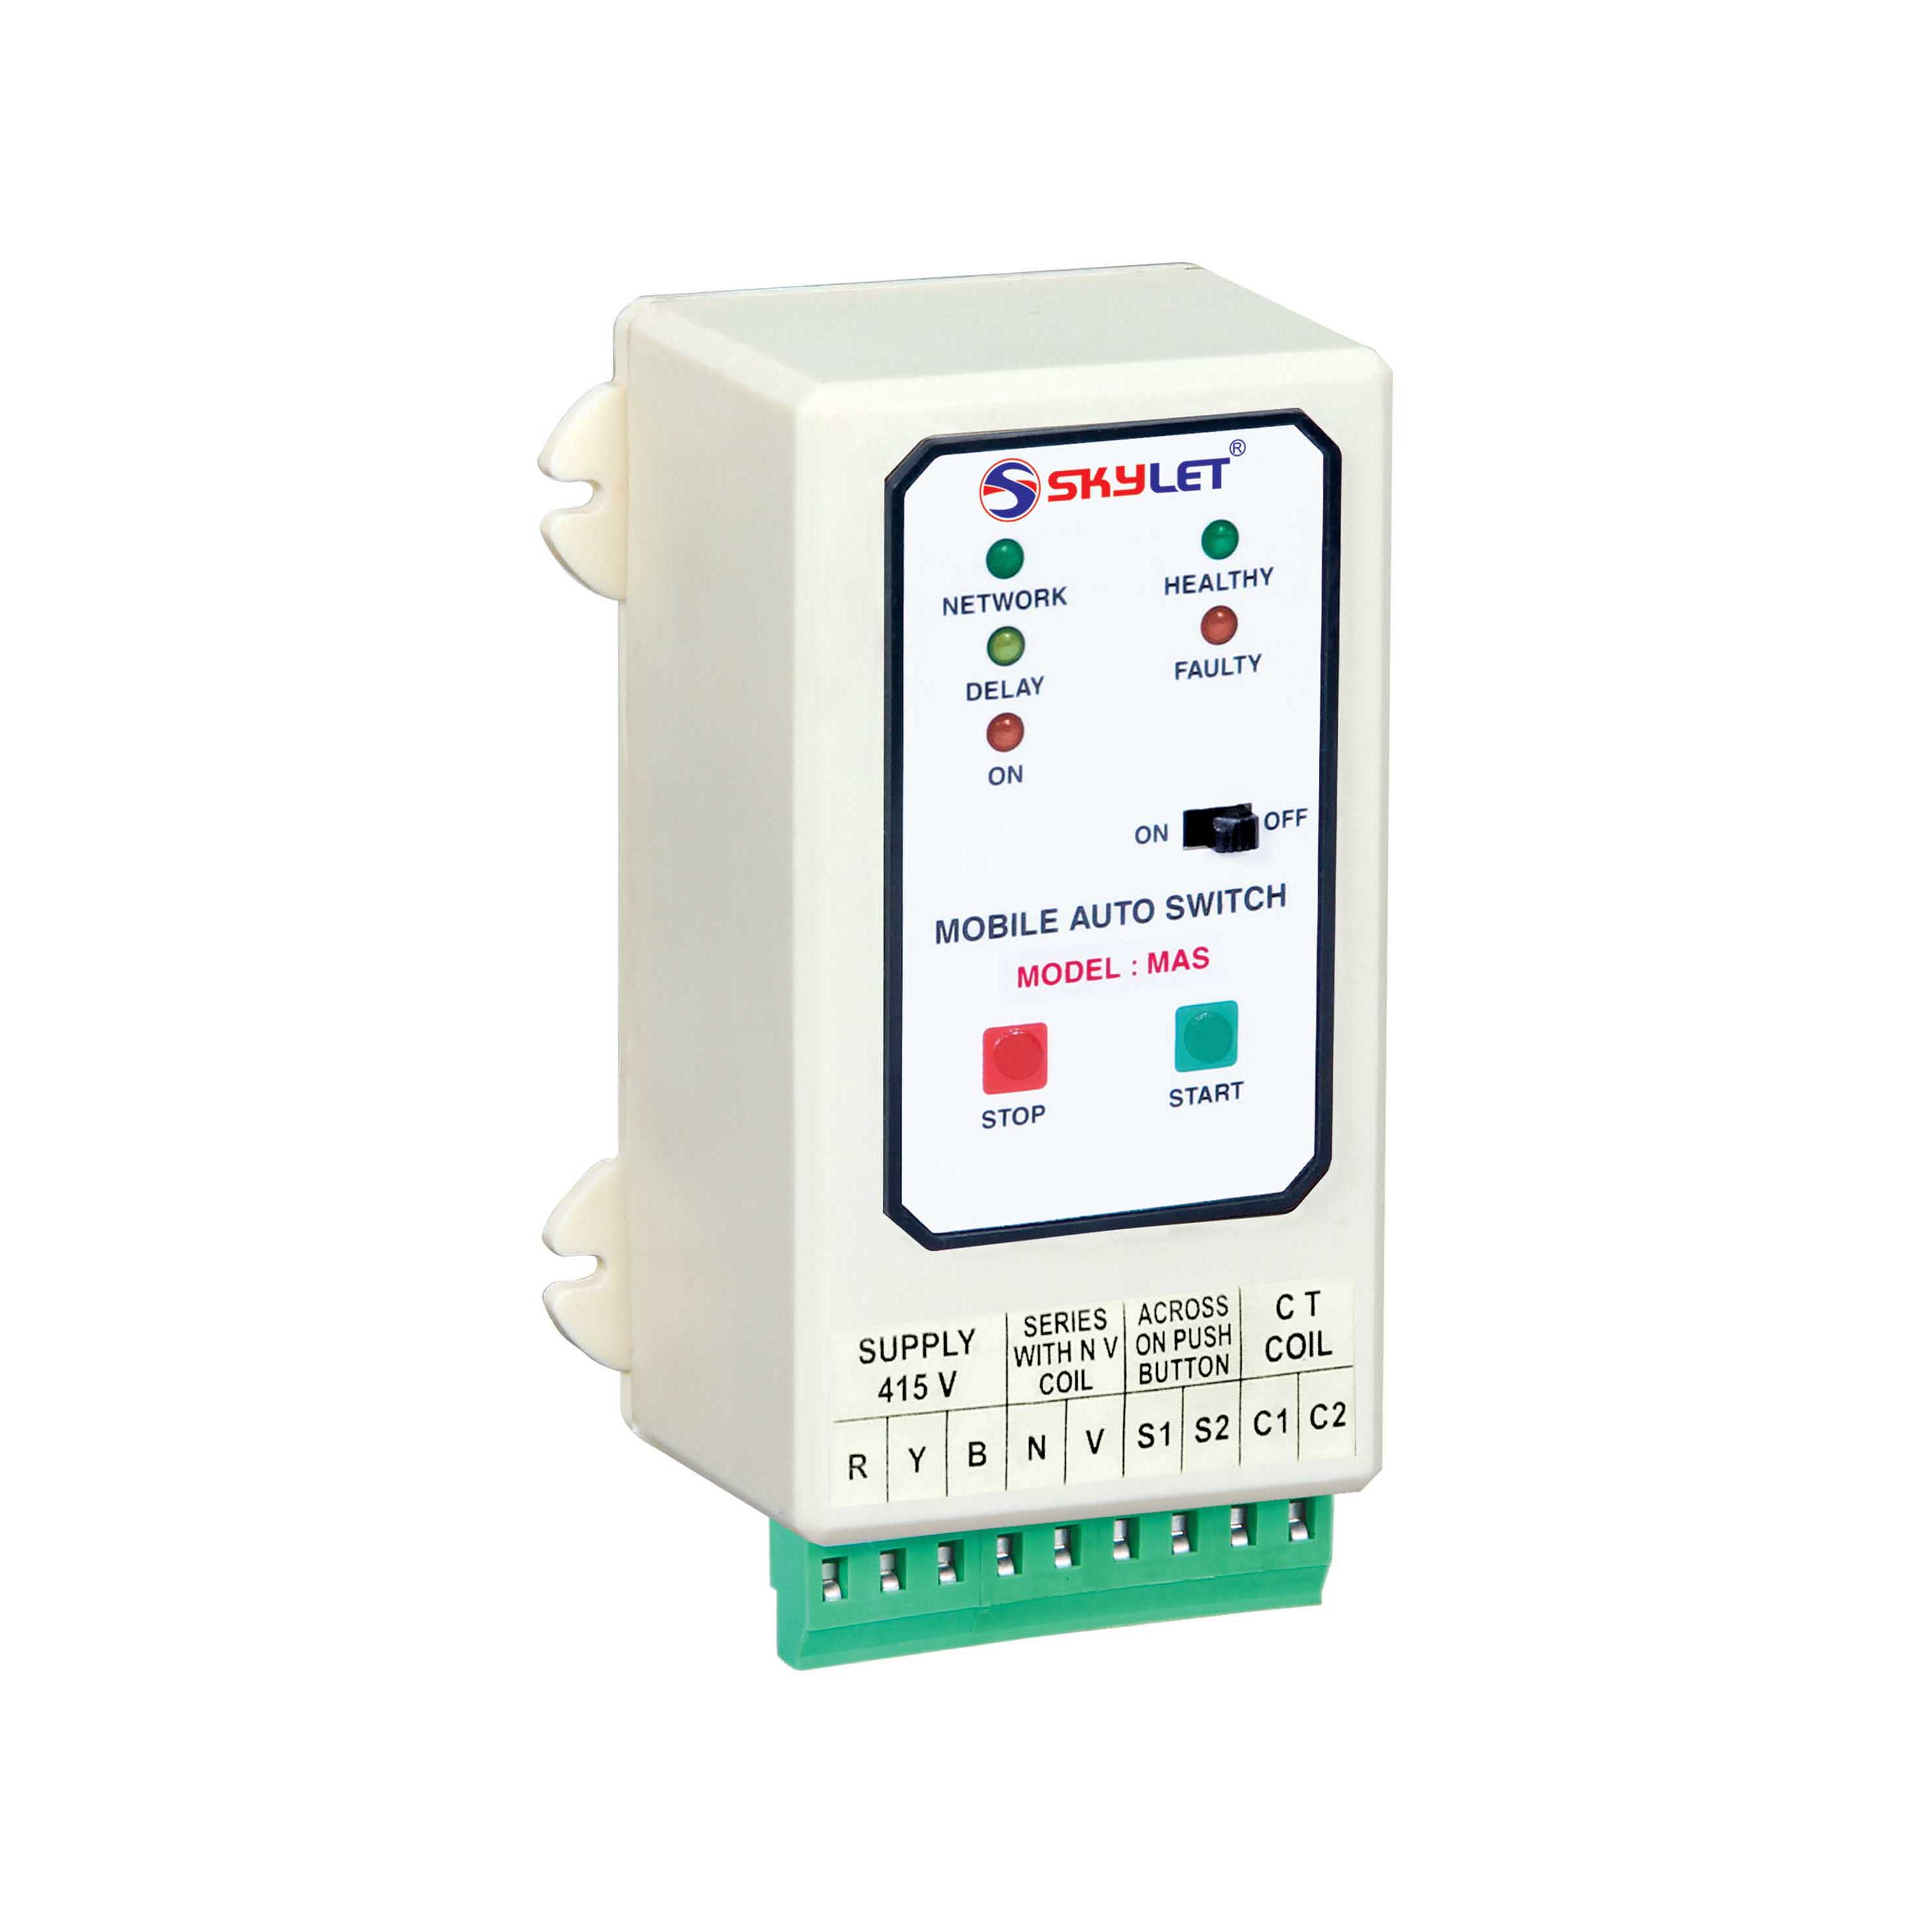 GSM MOTOR CONTROL 3 PHASE With CT Coil